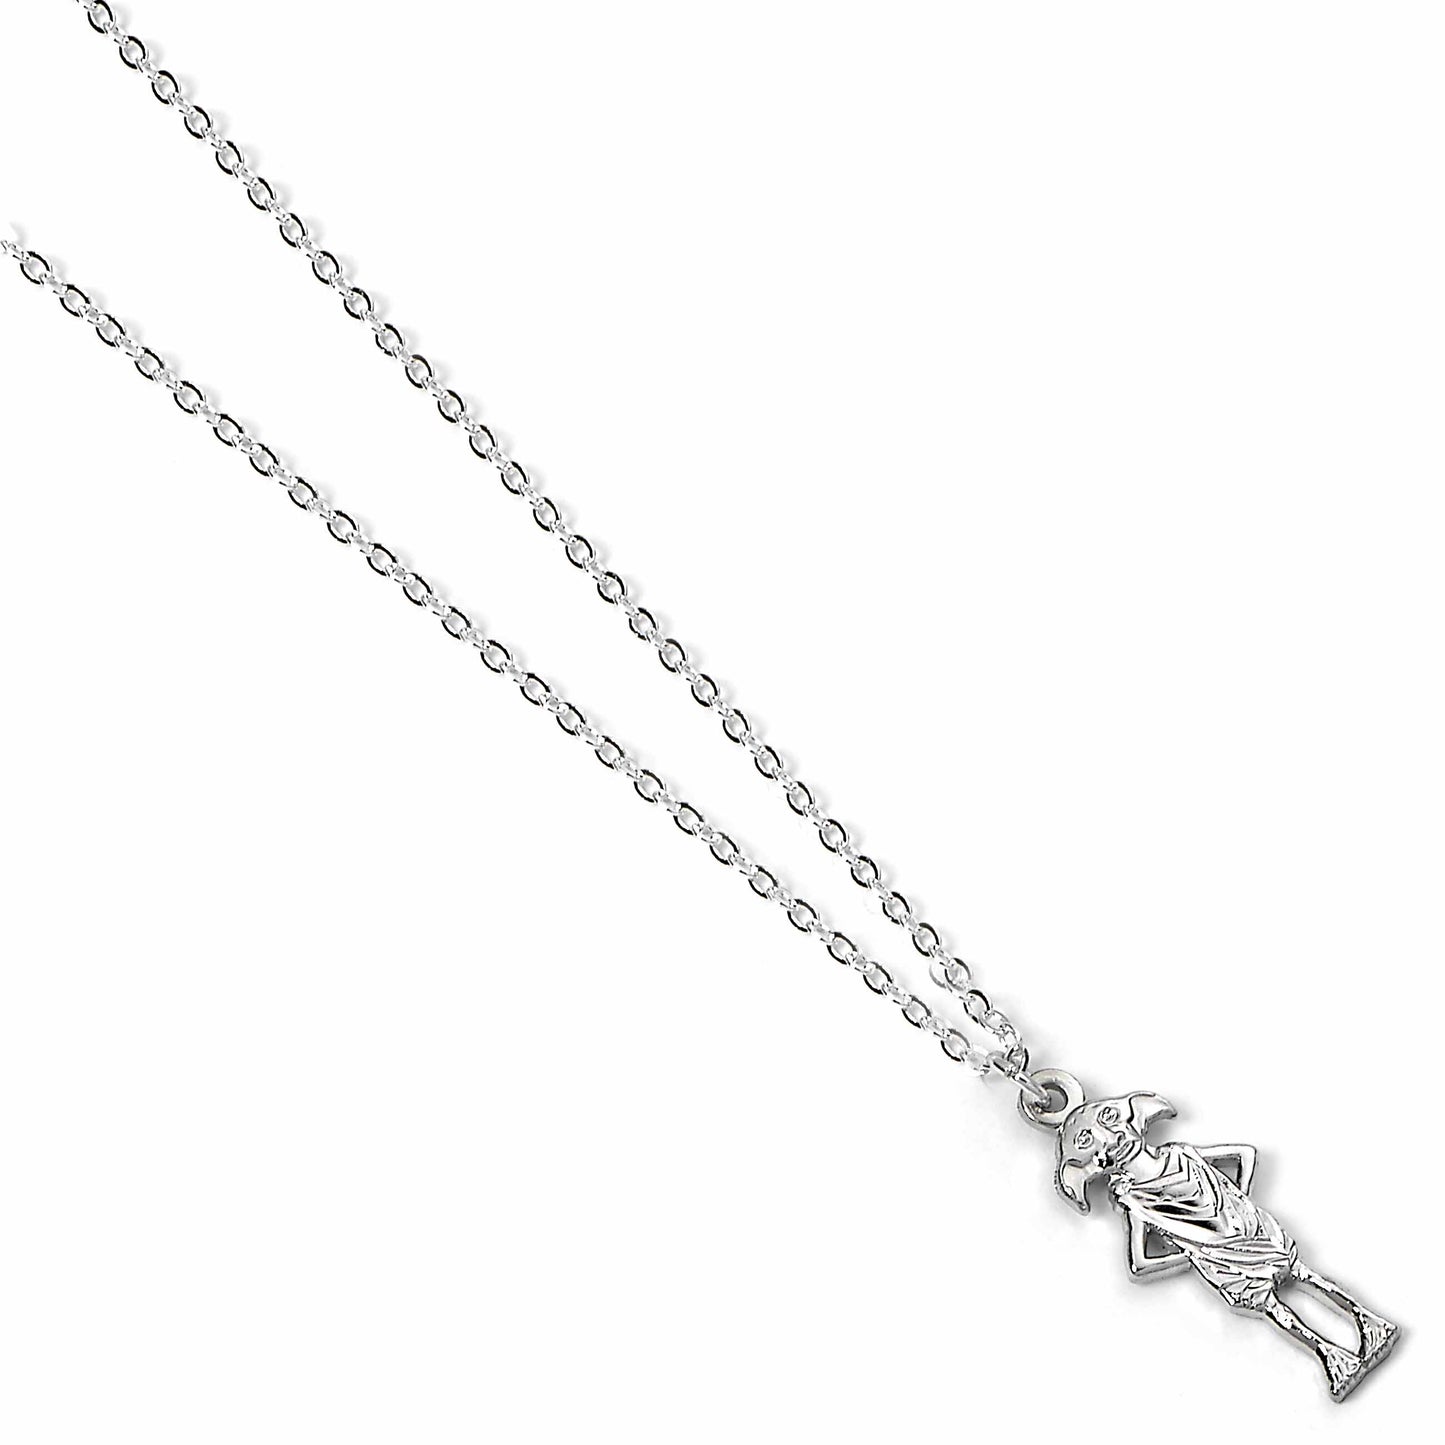 Harry Potter  Dobby the House Elf Necklace - Silver